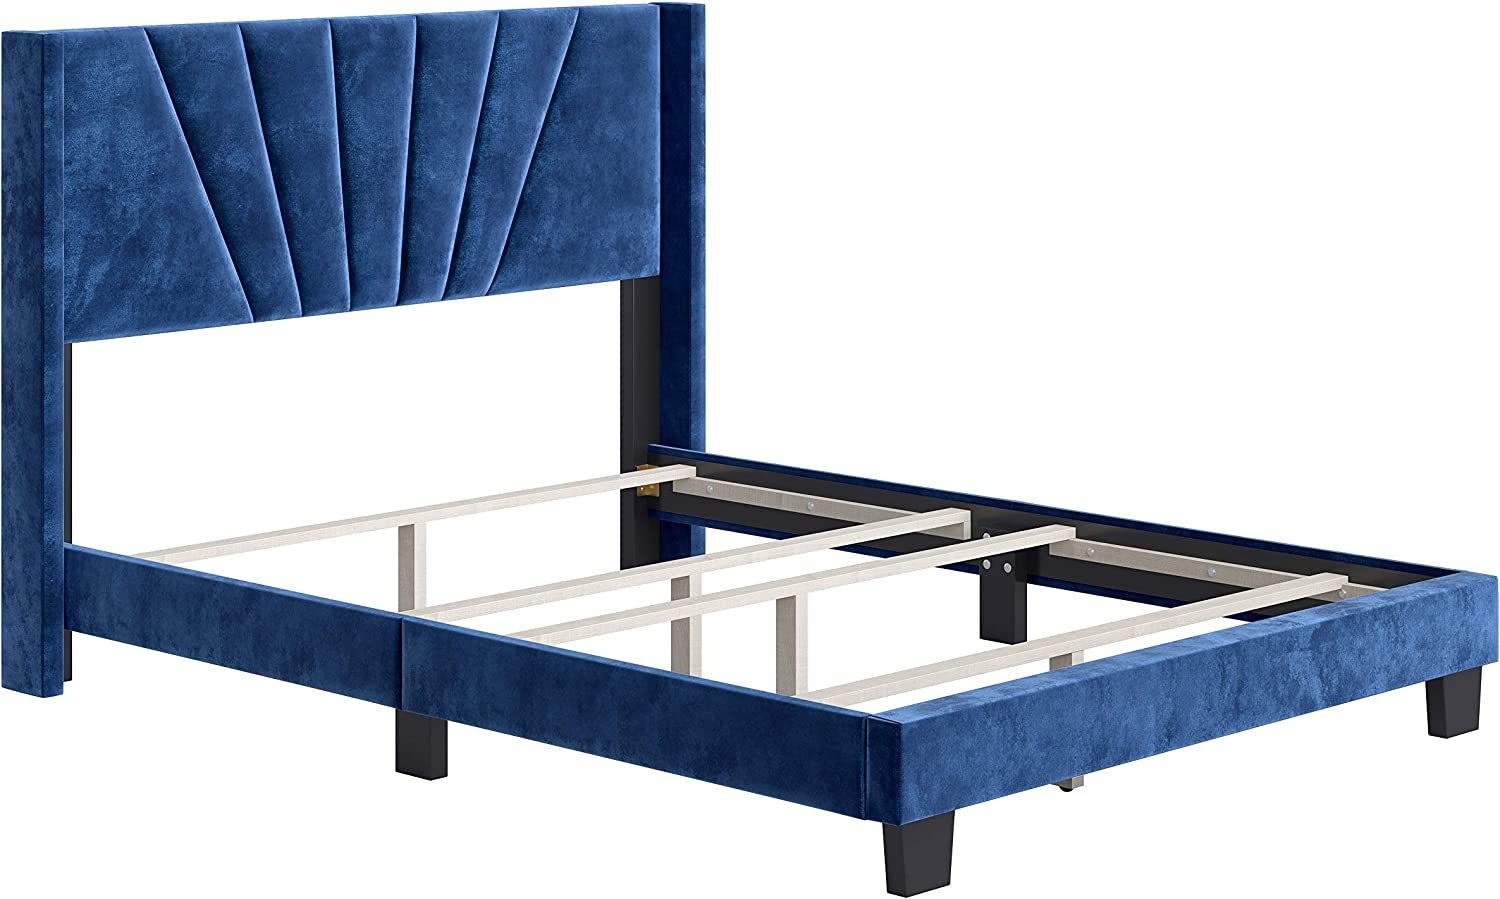 Primary image for Platform Queen Bed In Blue From Boyd Sleep.